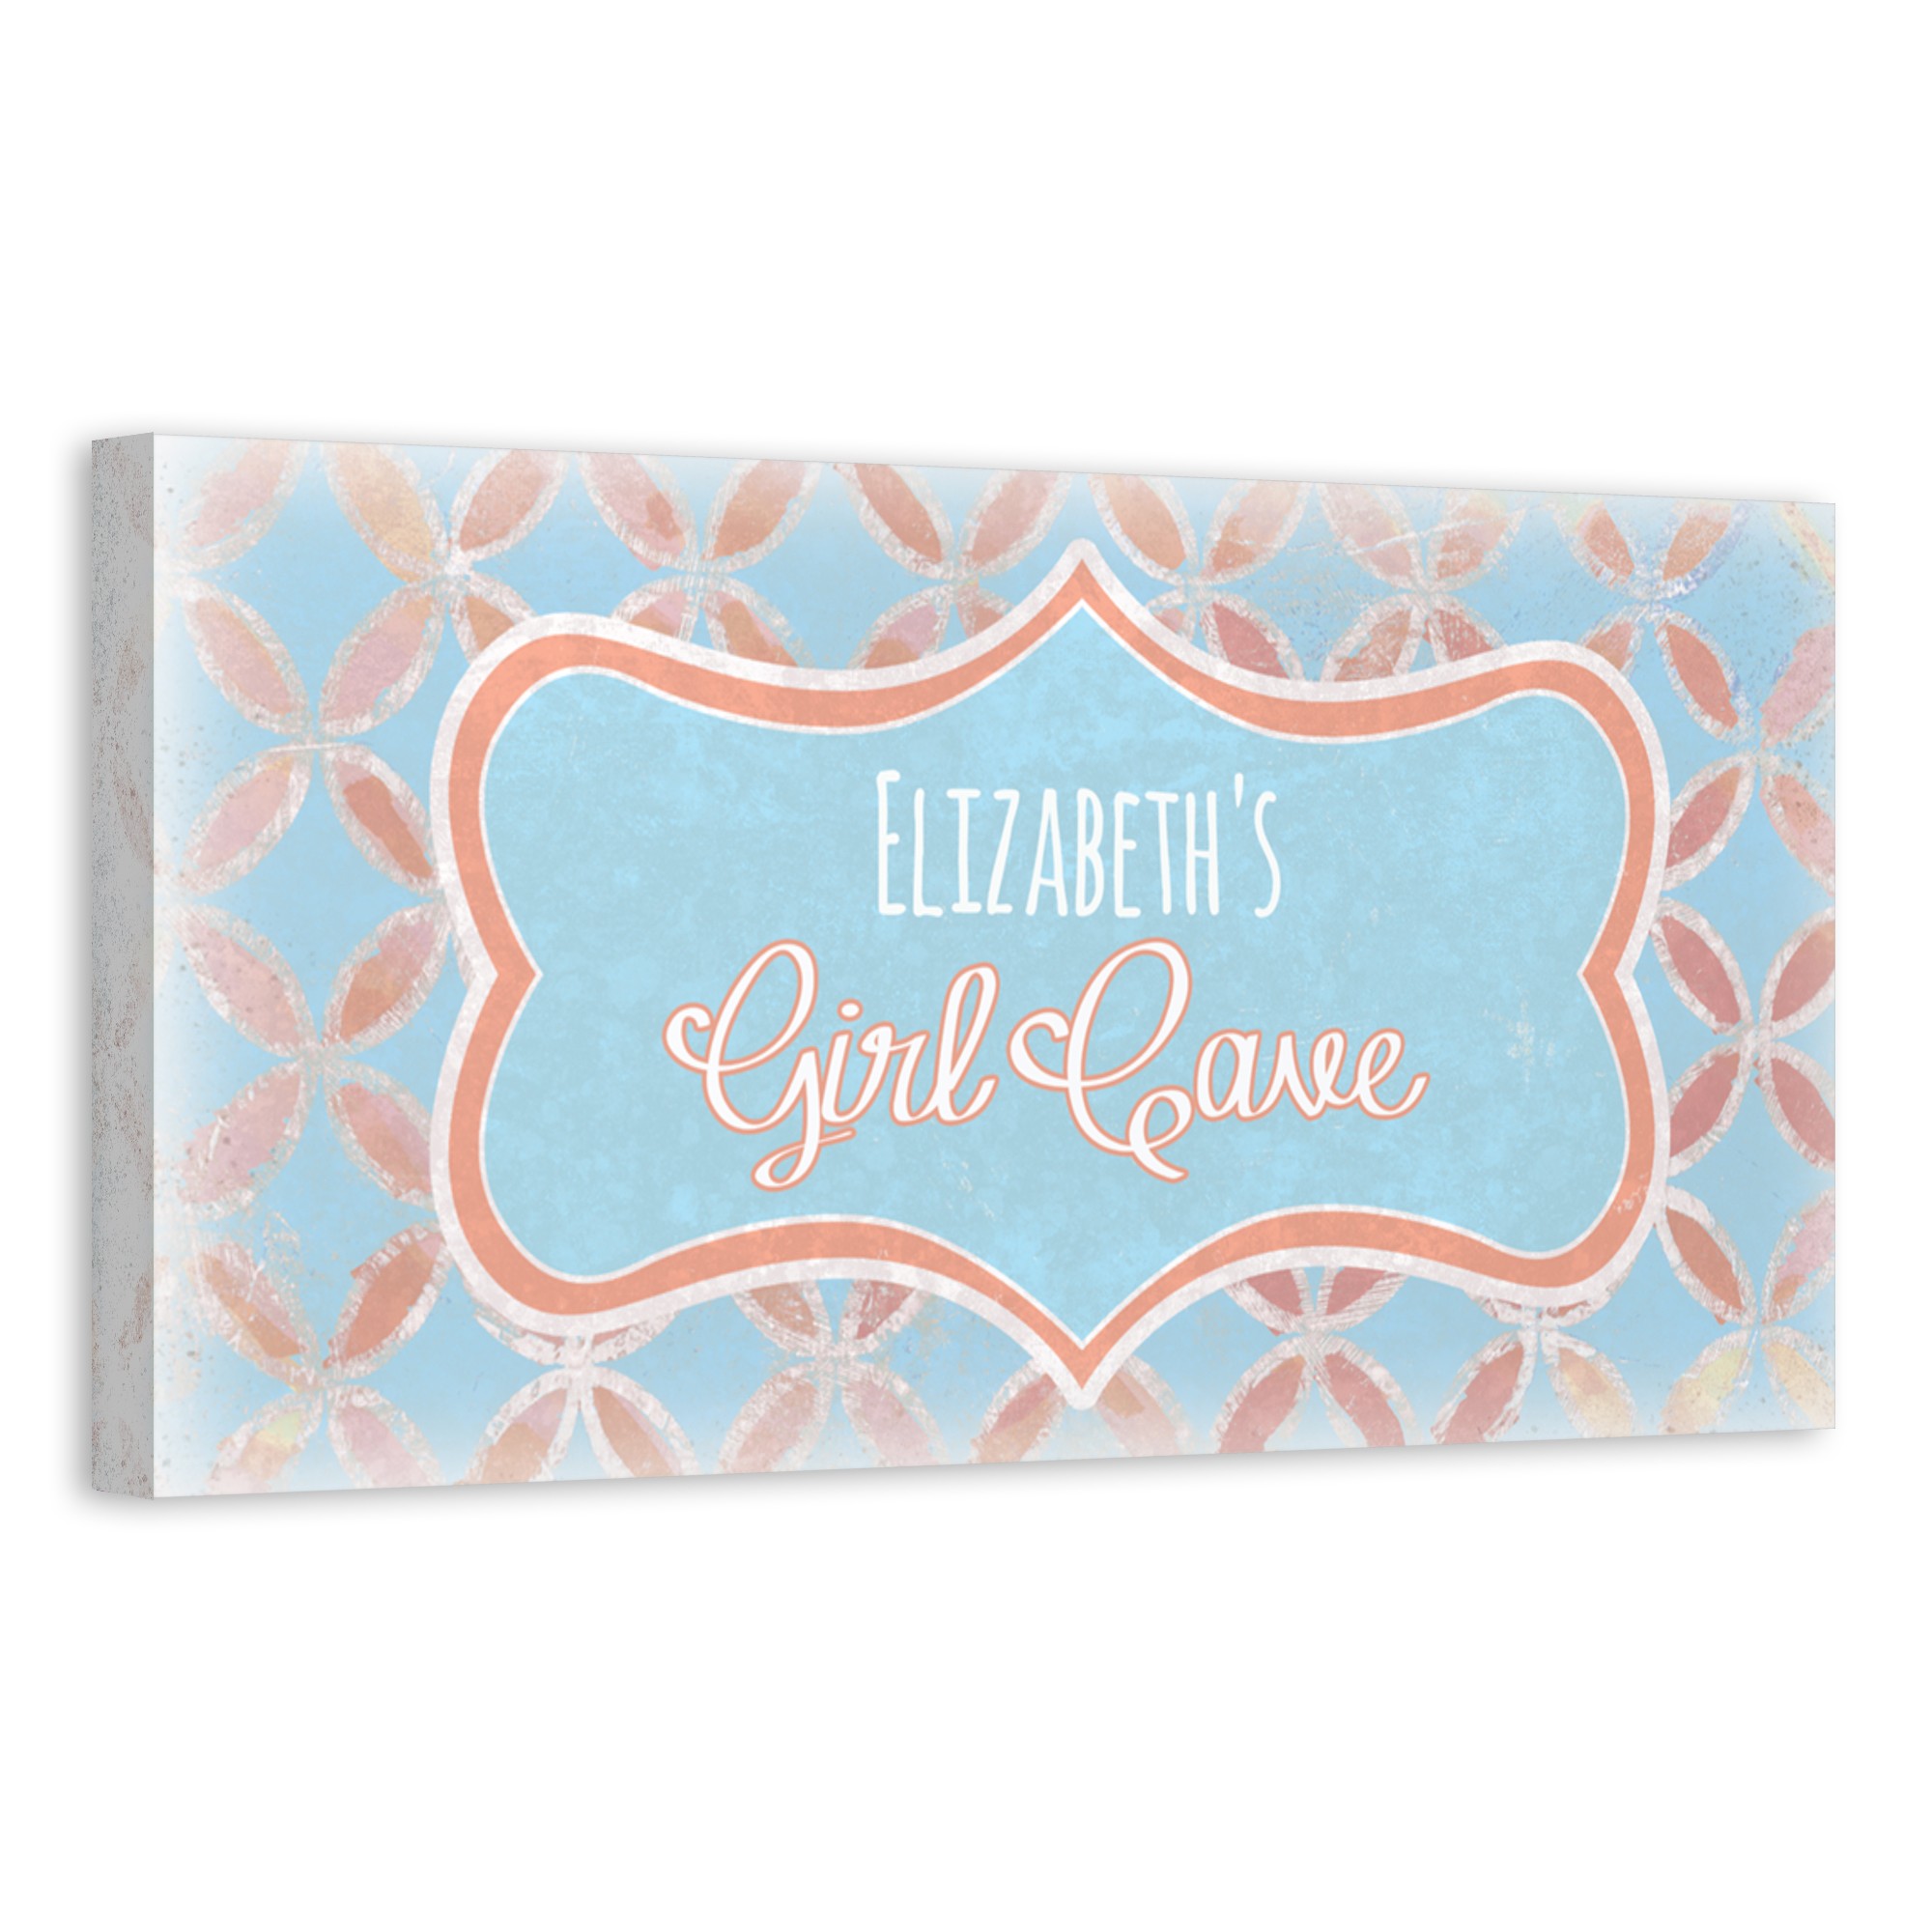 Girl Cave Blue And Coral 20x10 Personalized Canvas Wall Art